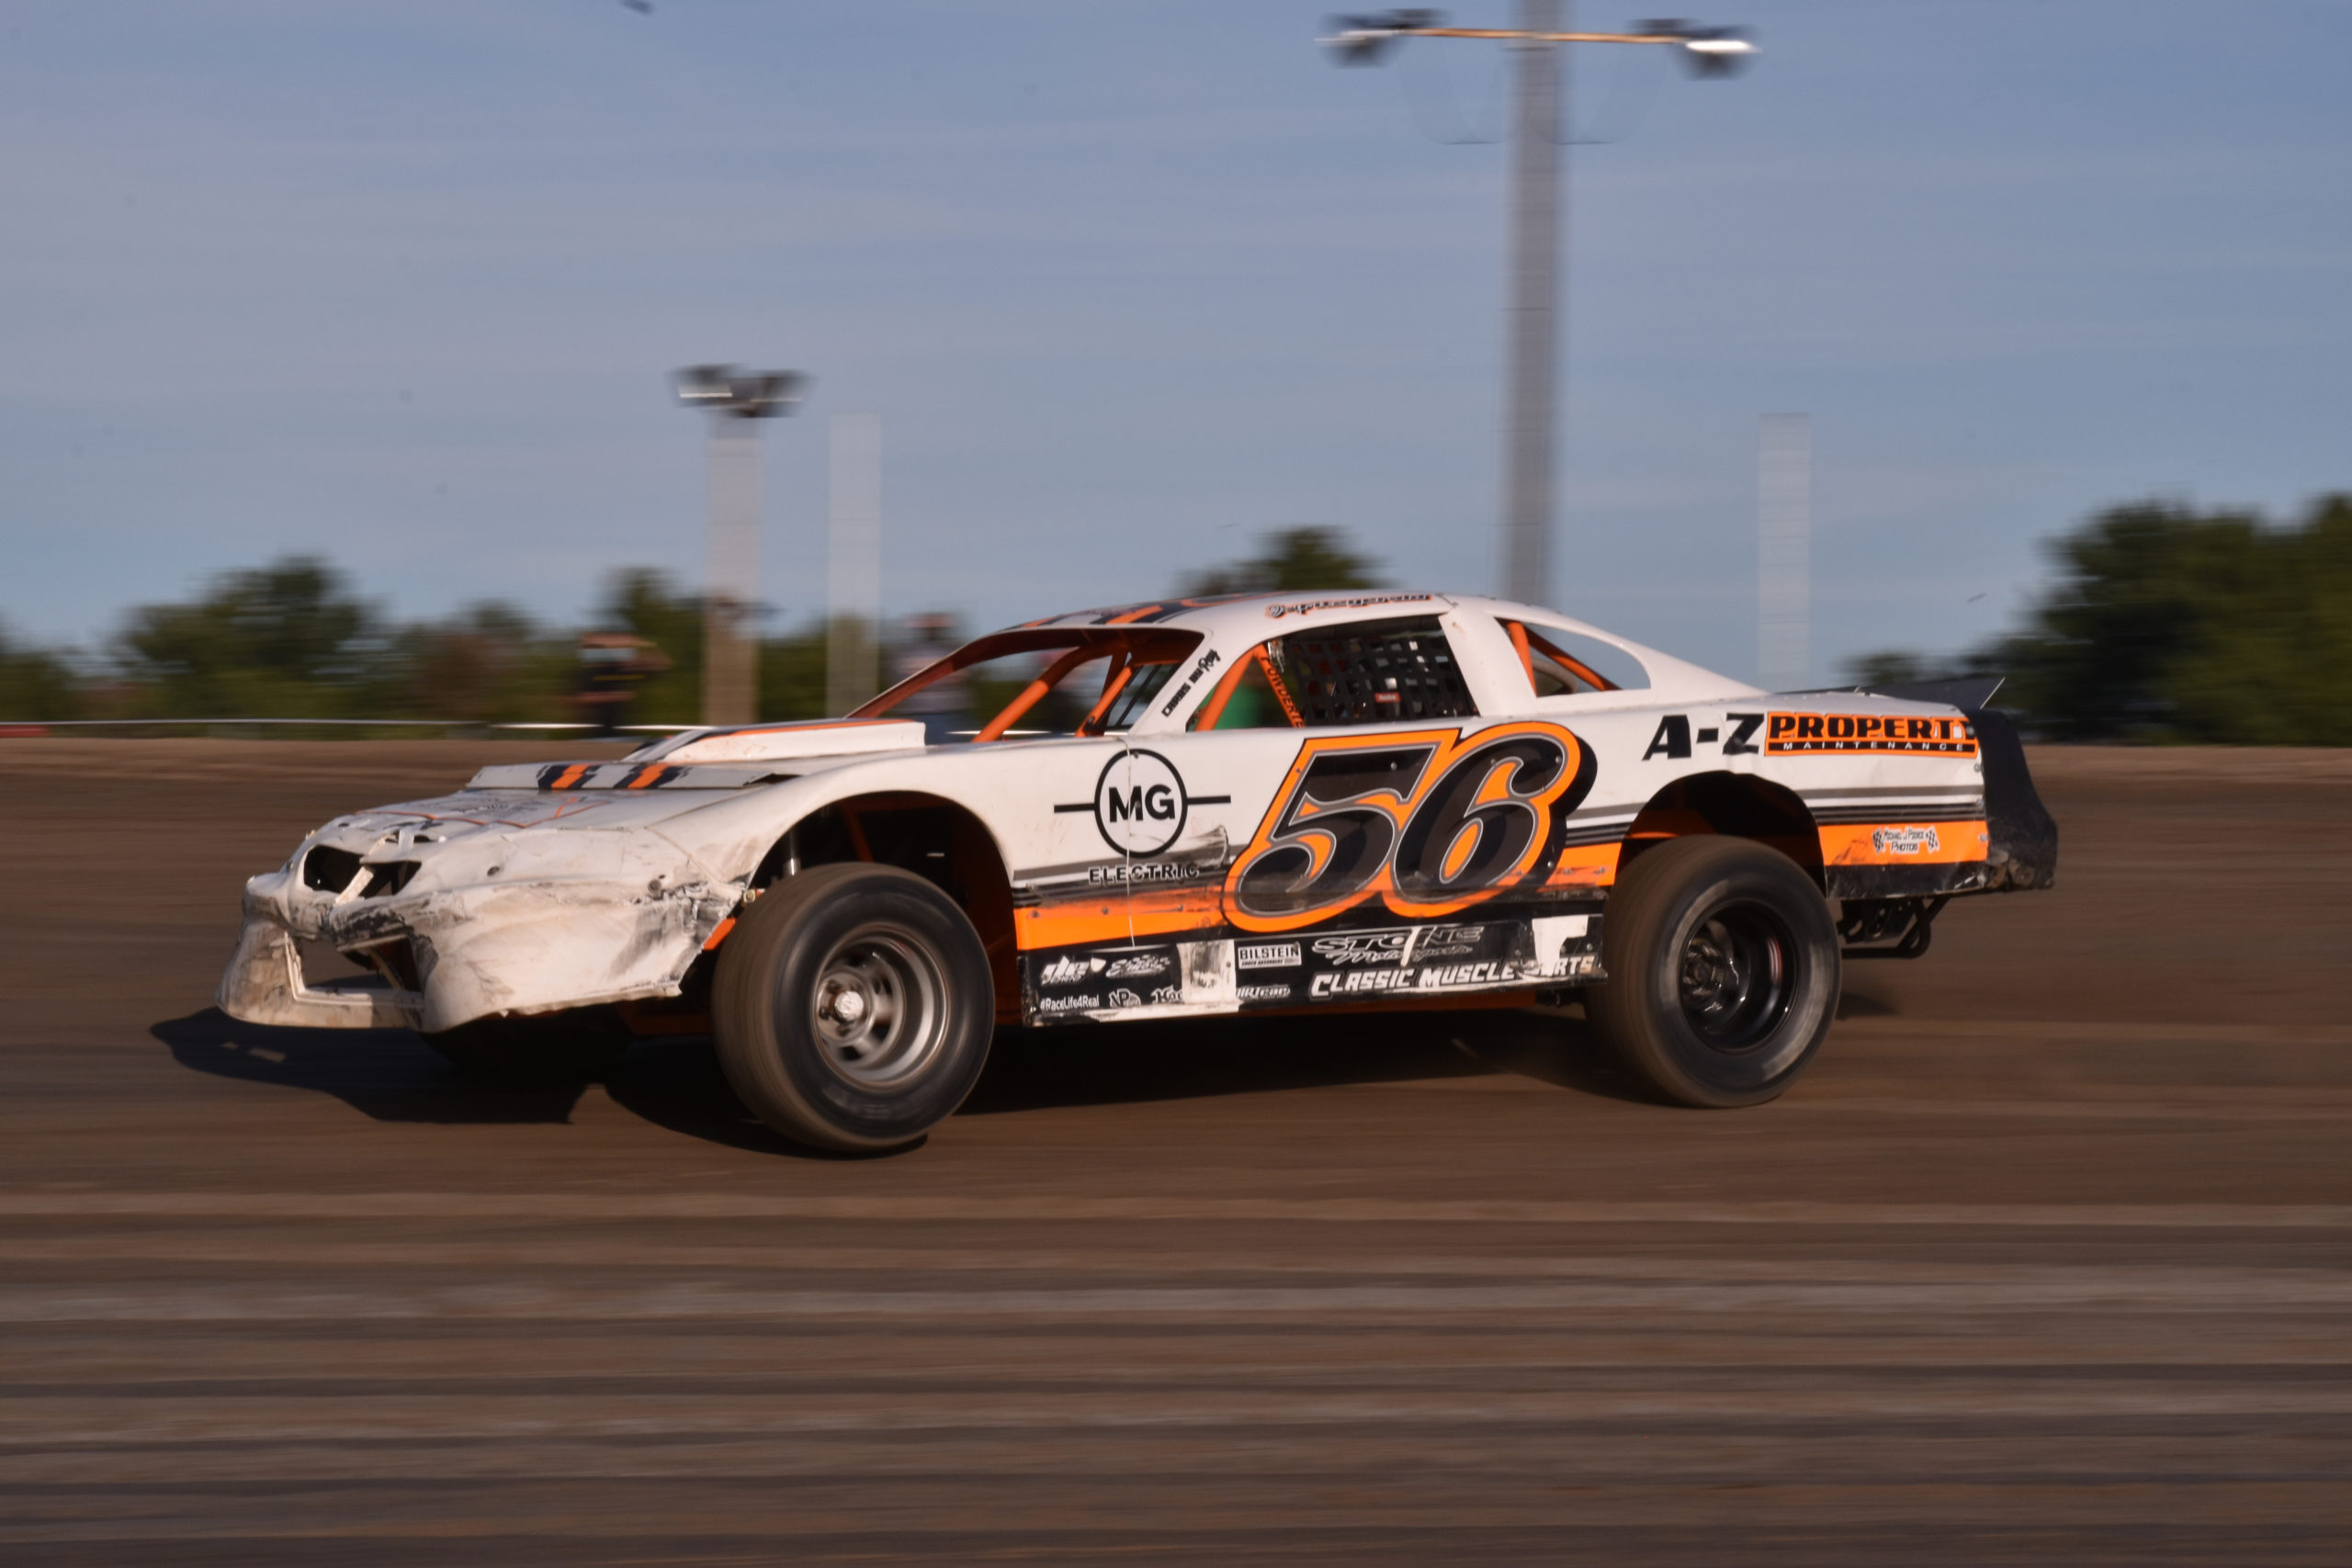 Download HOMEGROWN HERO: Albany-Saratoga DIRTcar Pro Stock Racer Gears Up to Kick Off OktoberFAST at Home ...